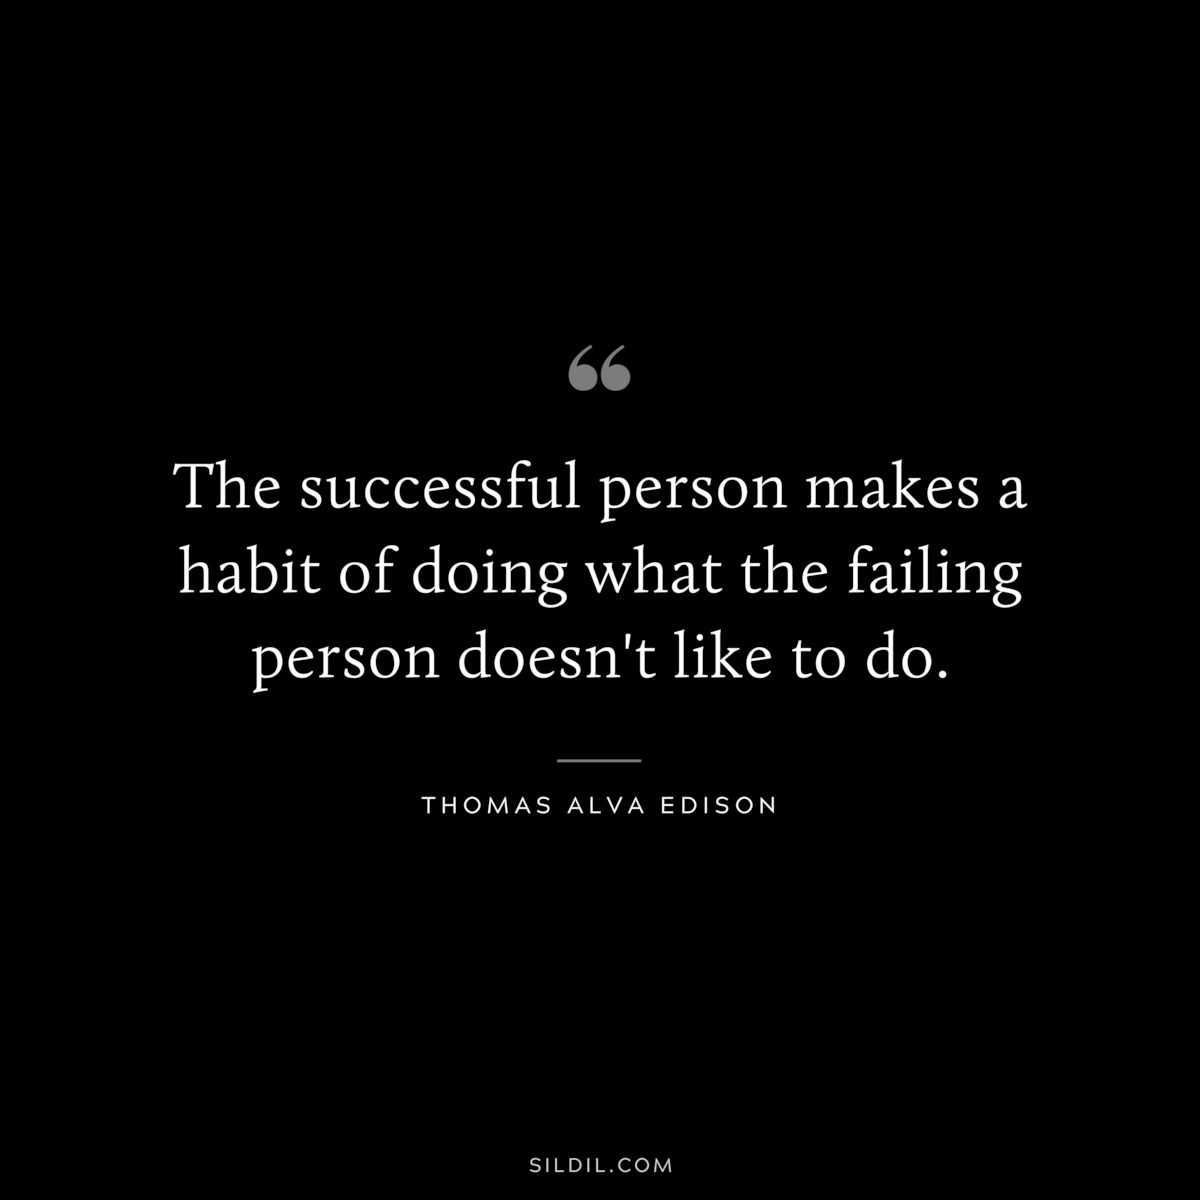 The successful person makes a habit of doing what the failing person doesn't like to do. ― Thomas Alva Edison